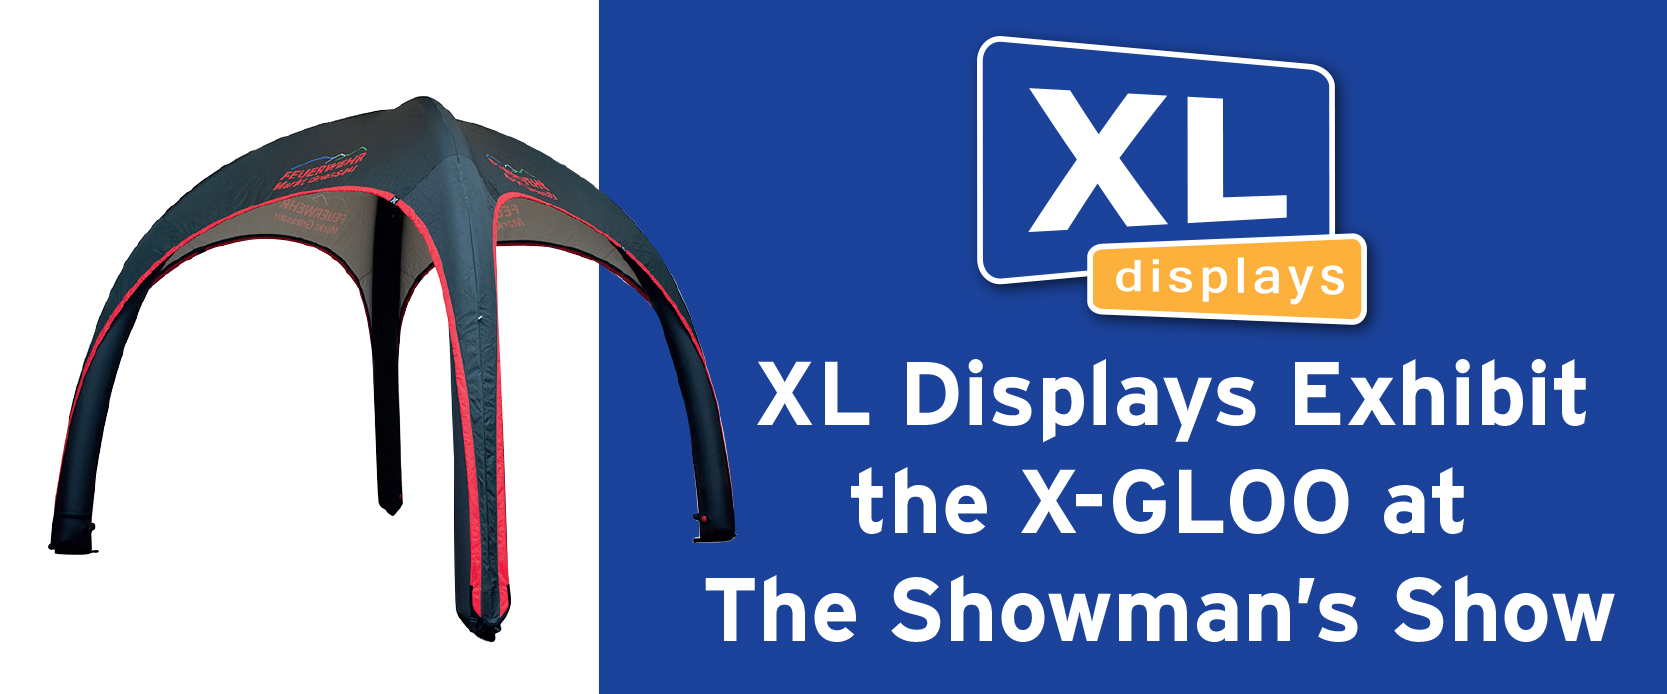 XL Displays Exhibit the X-GLOO at The Showman’s Show